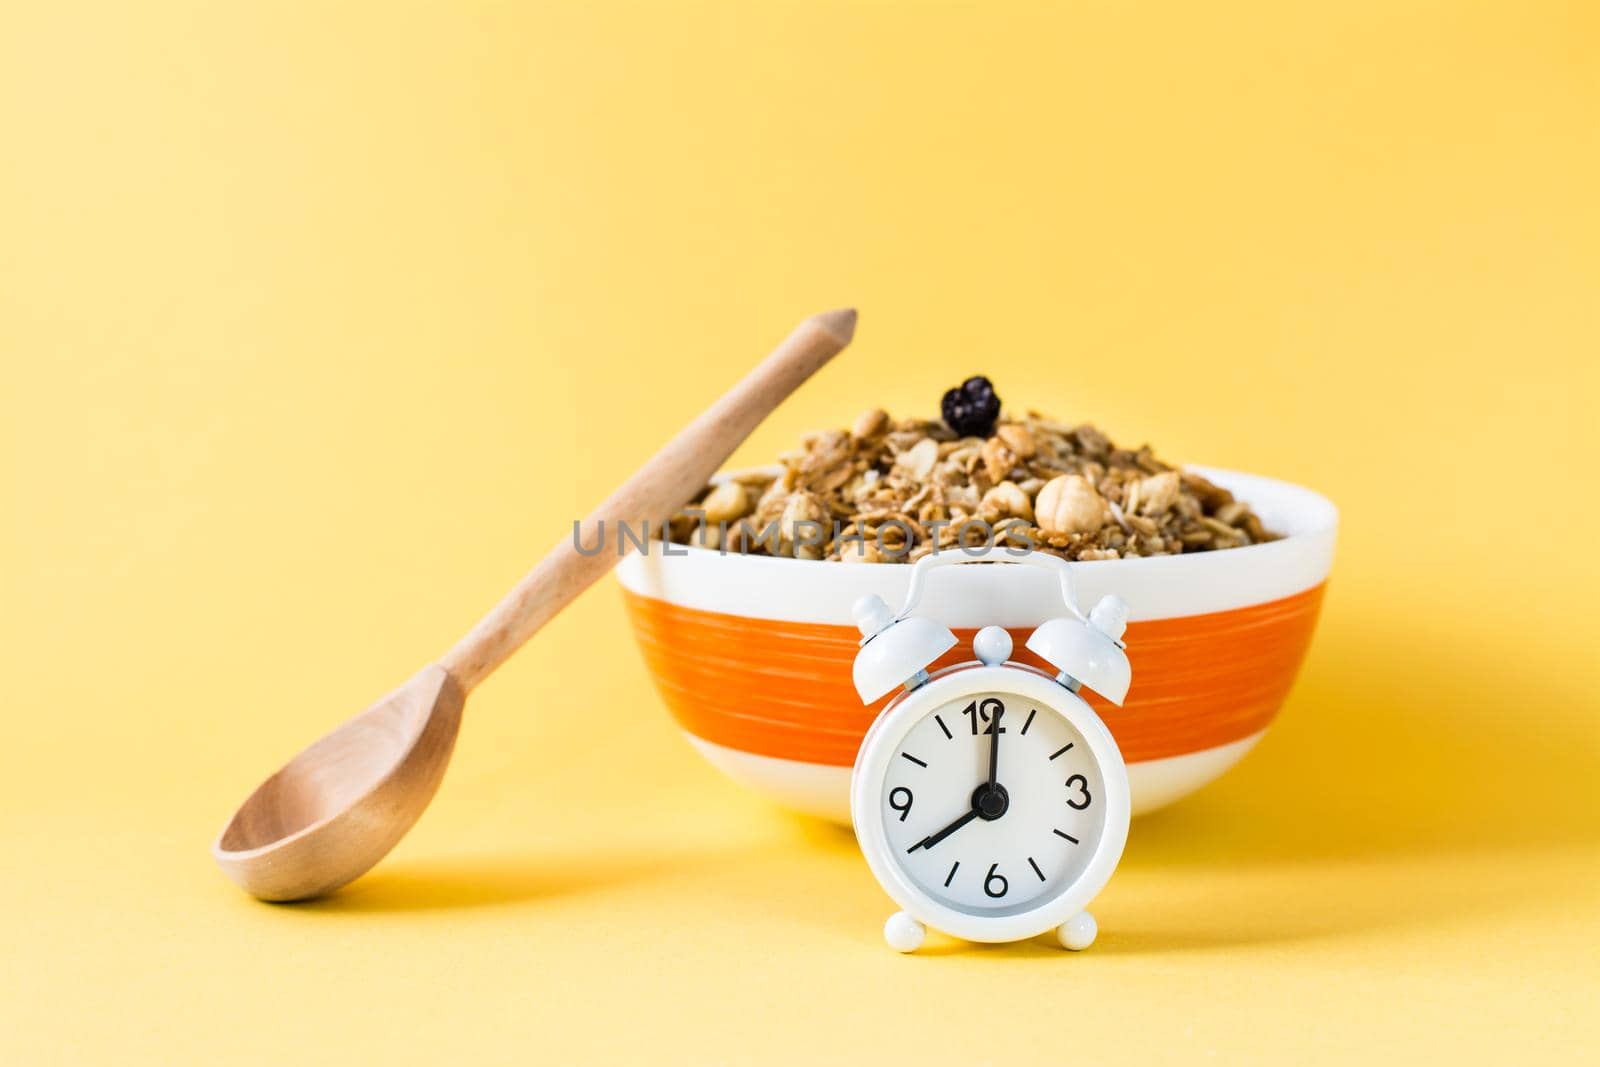 Healthy eating. Alarm clock in front of a baked granola made from oats, nuts and raisins in a bowl and a wooden spoon on a yellow background